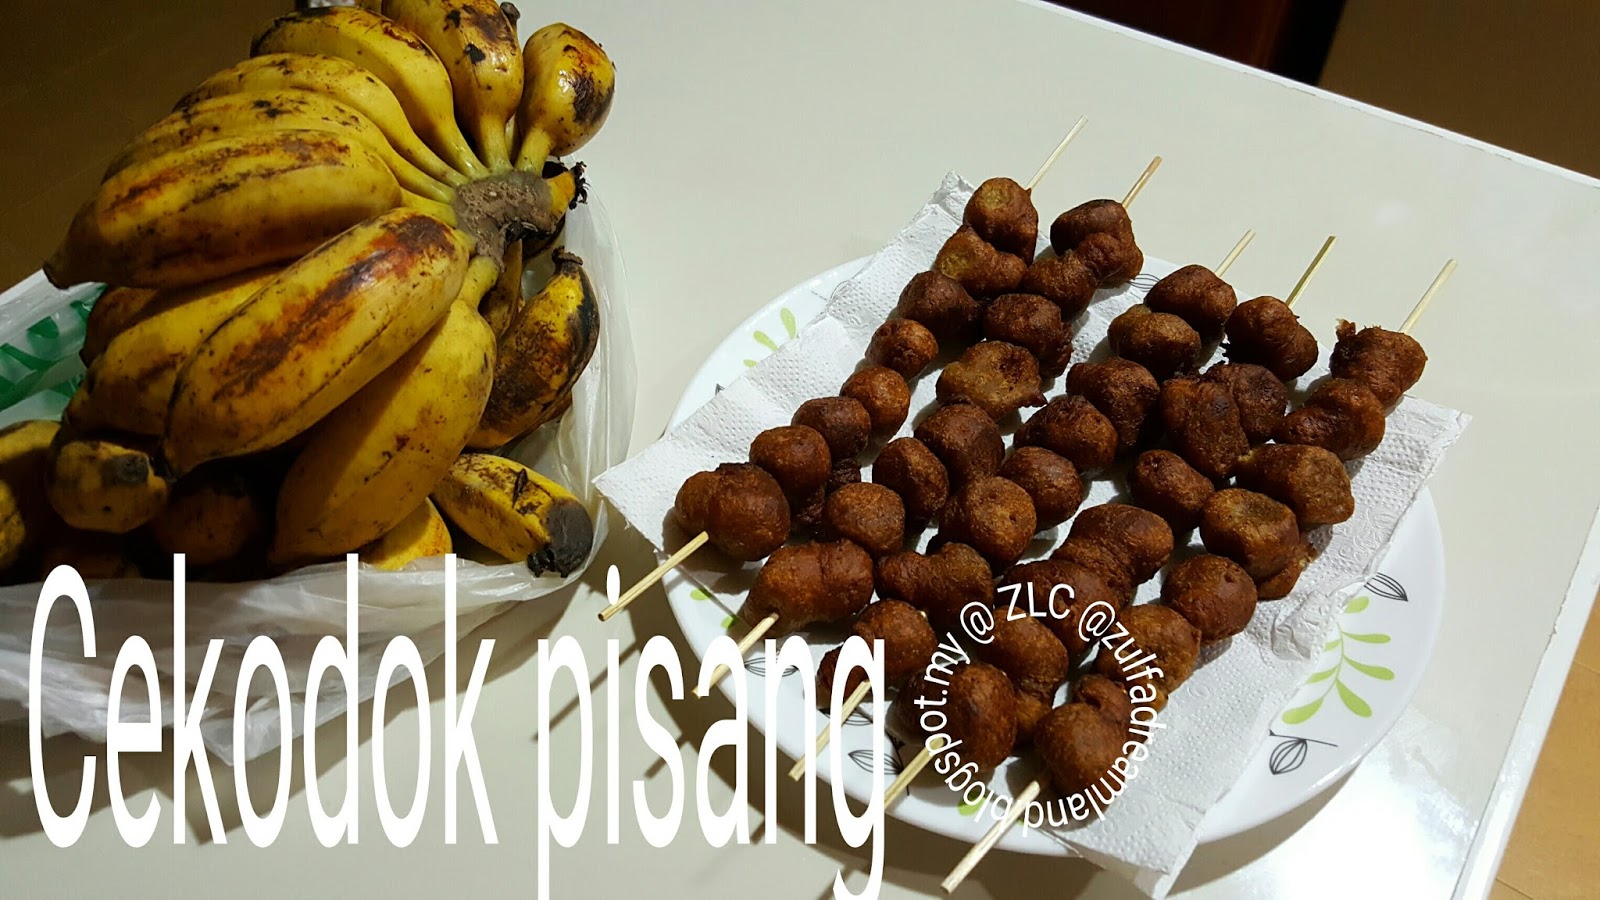 ZULFAZA LOVES COOKING: Cucur pisang